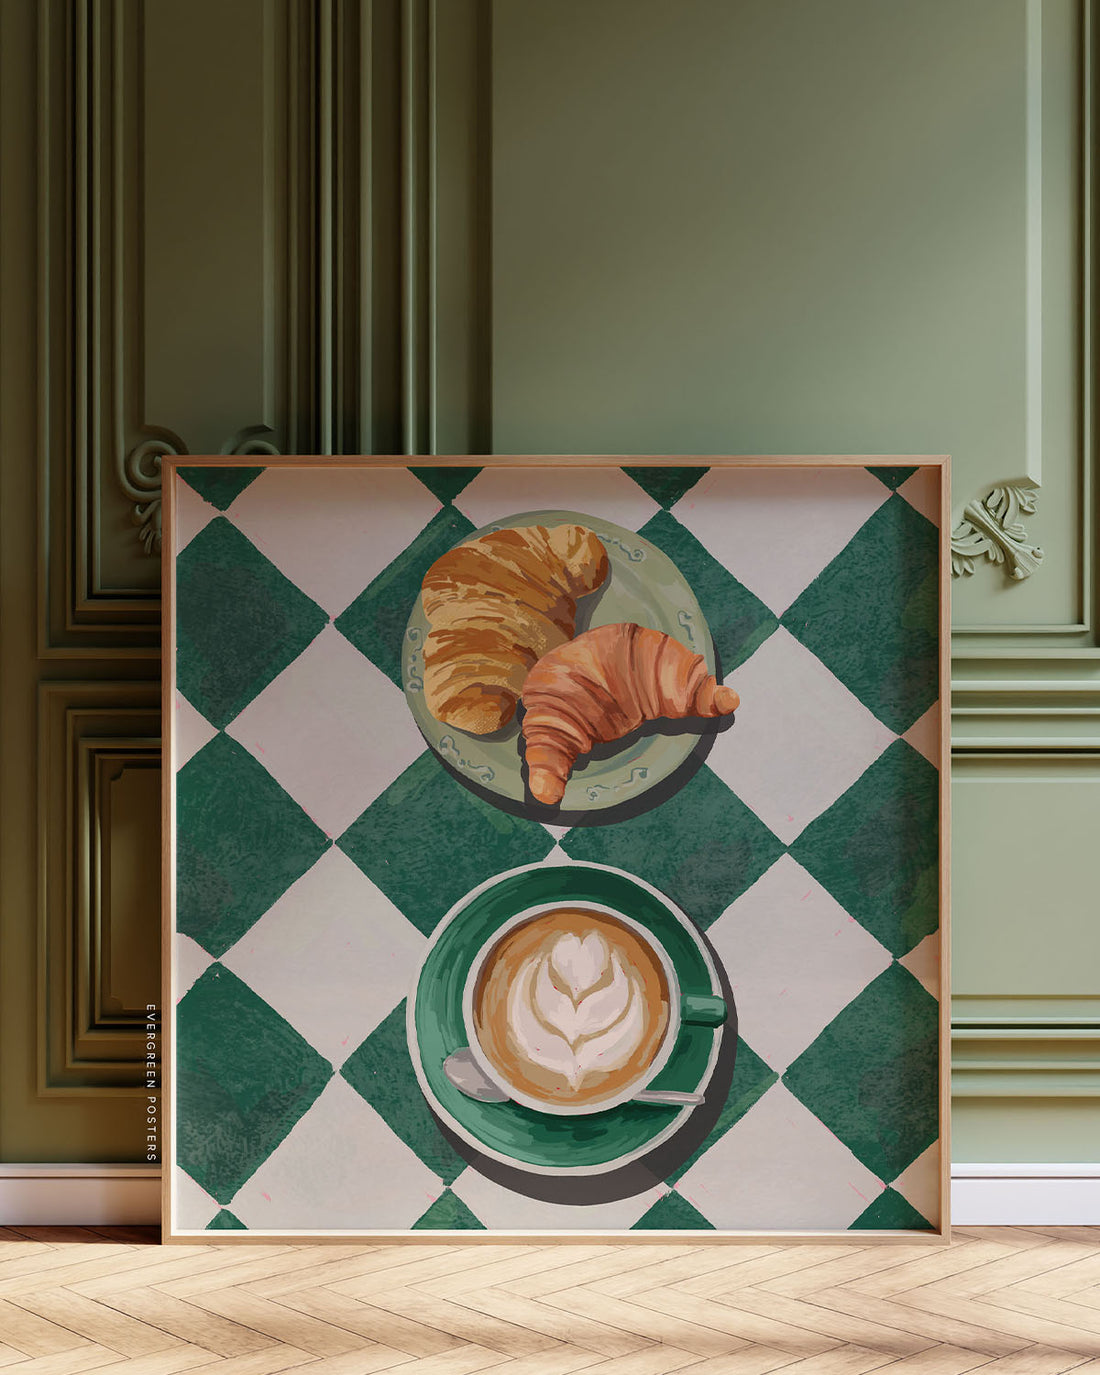 Square Croissant and Coffee Green Poster. Modern French Breakfast